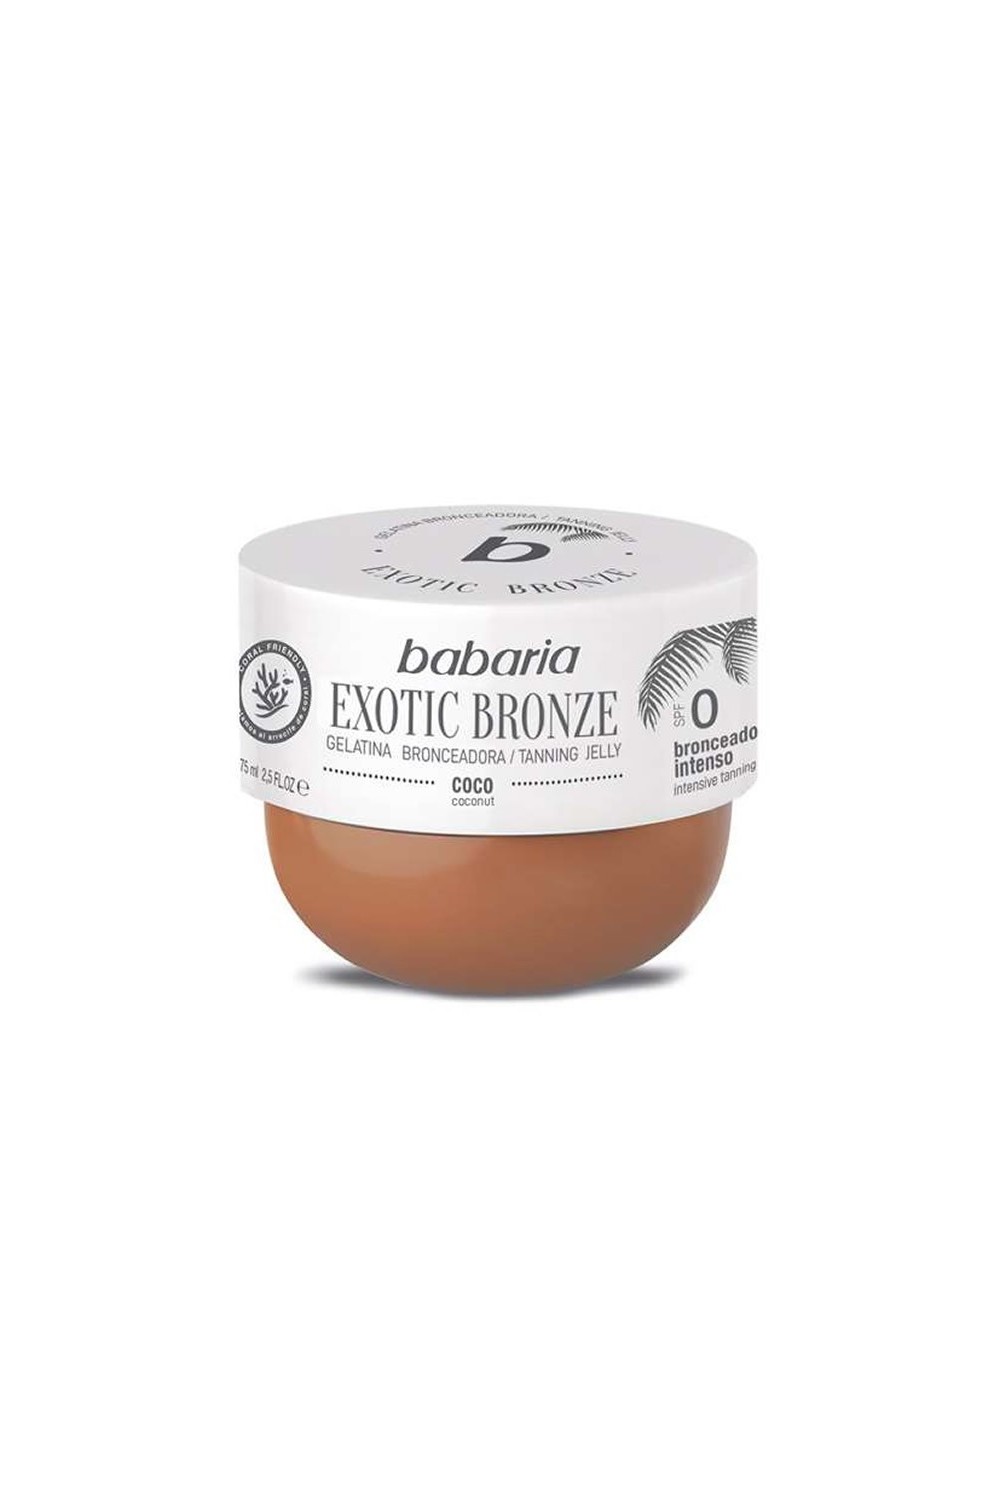 Babaria Exotic Bronze Tanning Jelly Coconut Spf0 75ml